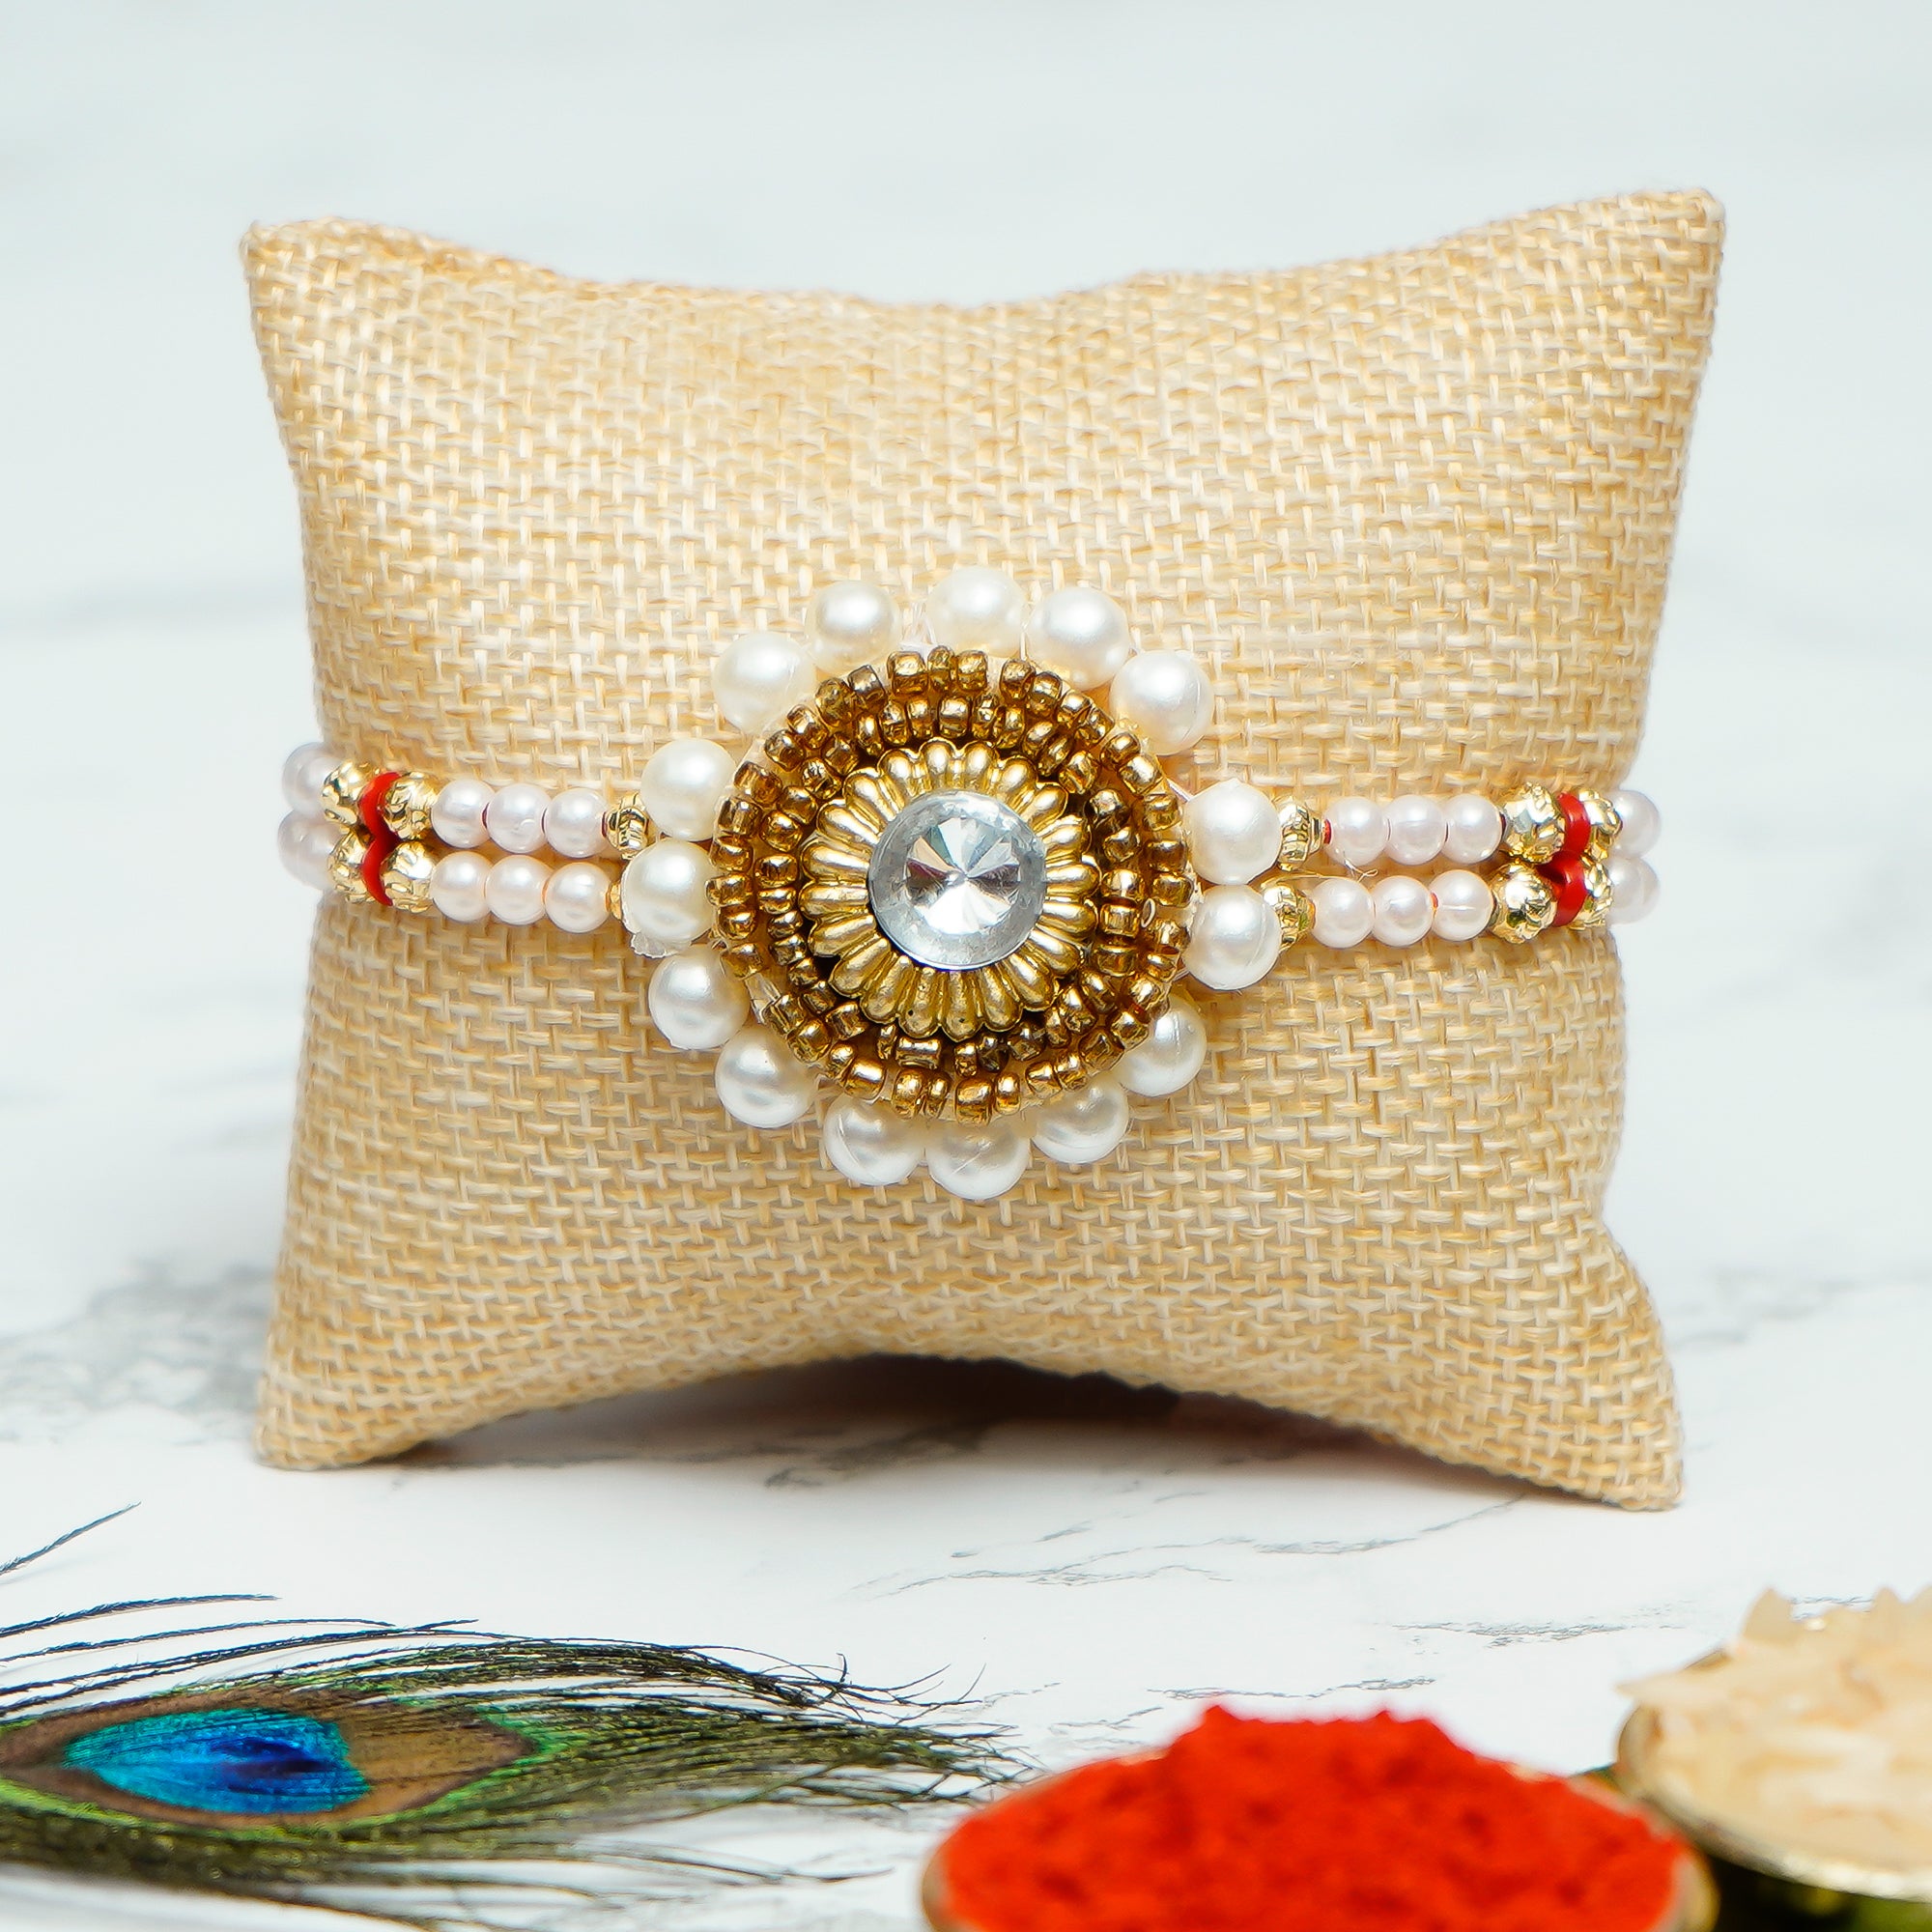 Designer Handcrafted Stone Pearl Rakhi with Brass Lord Ganesha on Rocking Chair Antique Showpiece and Roli Chawal Pack, Best Wishes Greeting Card 1